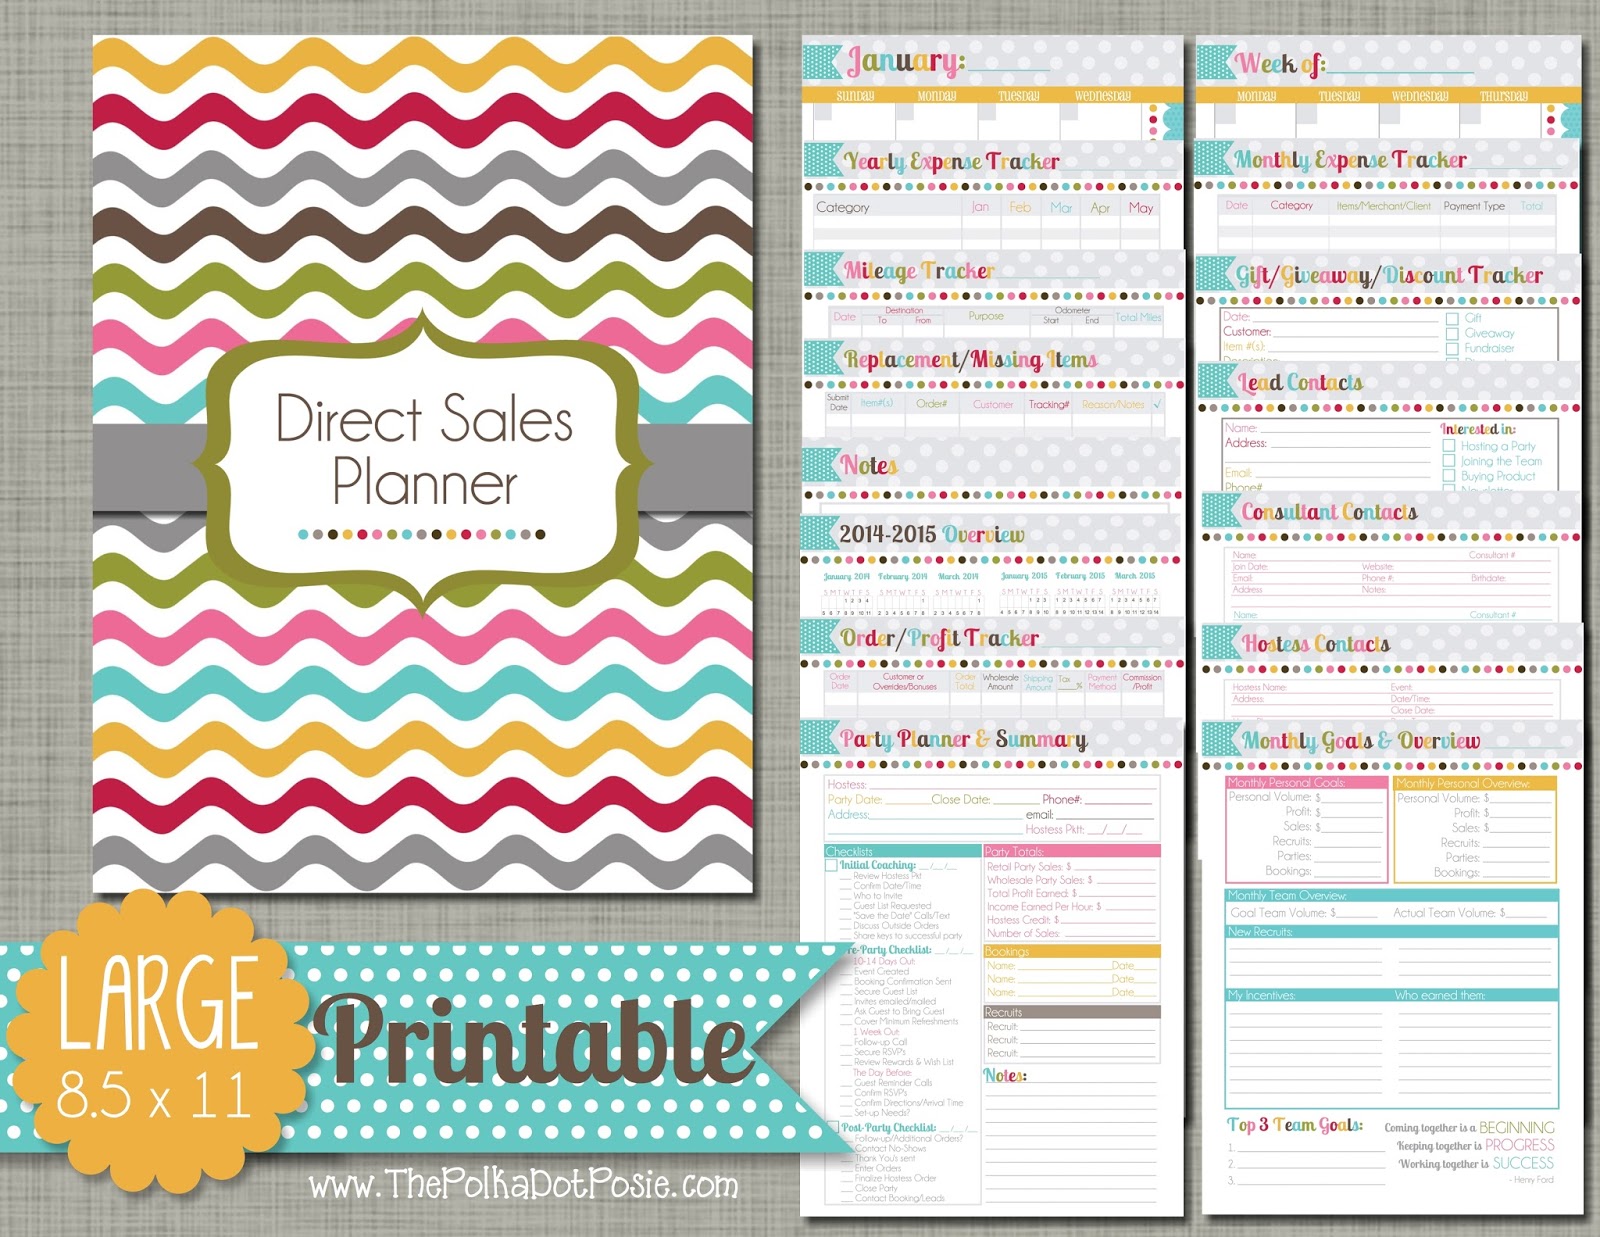 The Polka Dot Posie Direct Sales Planner Instructions For Printing 